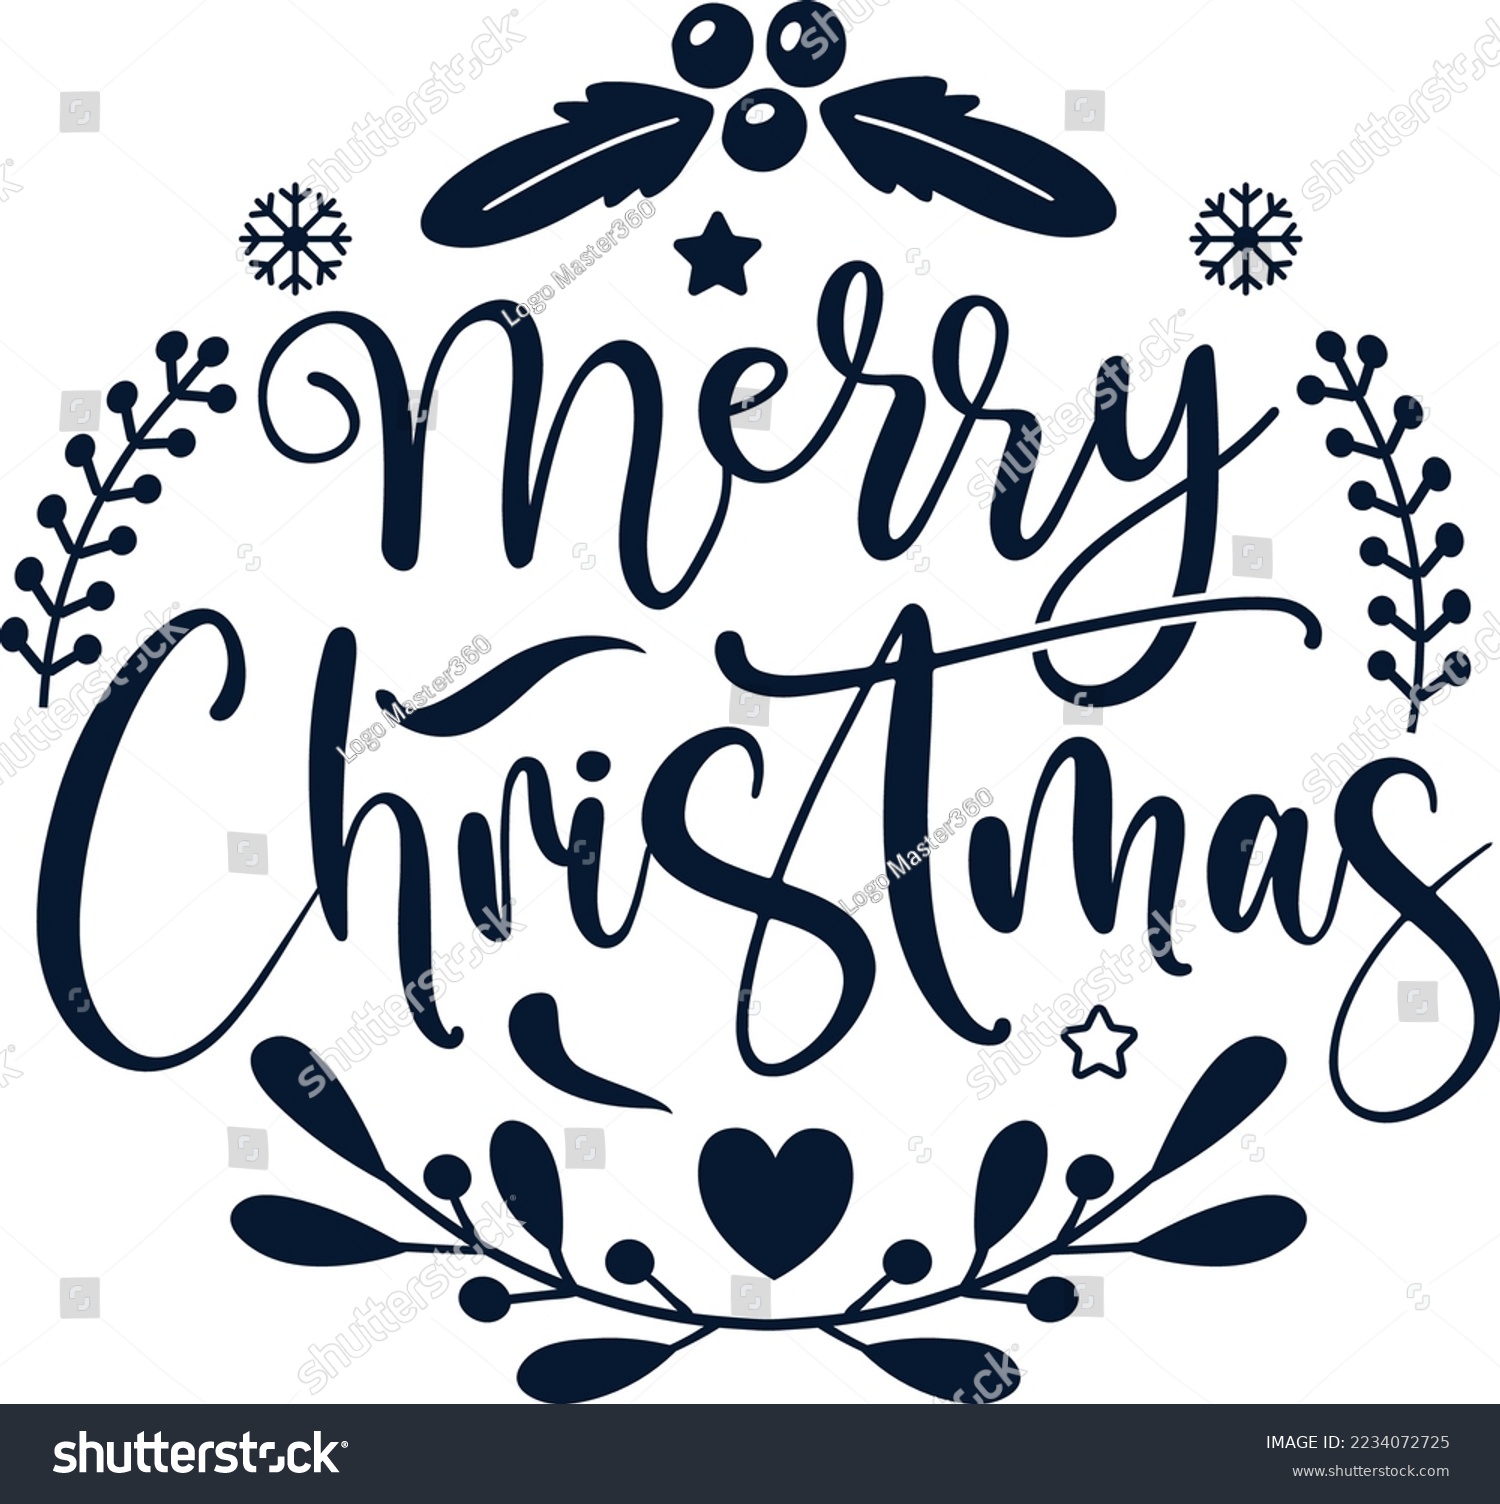 SVG of Merry Christmas SVG, png, eps, Christmas Quotes, Winter SVG, Santa SVG svg